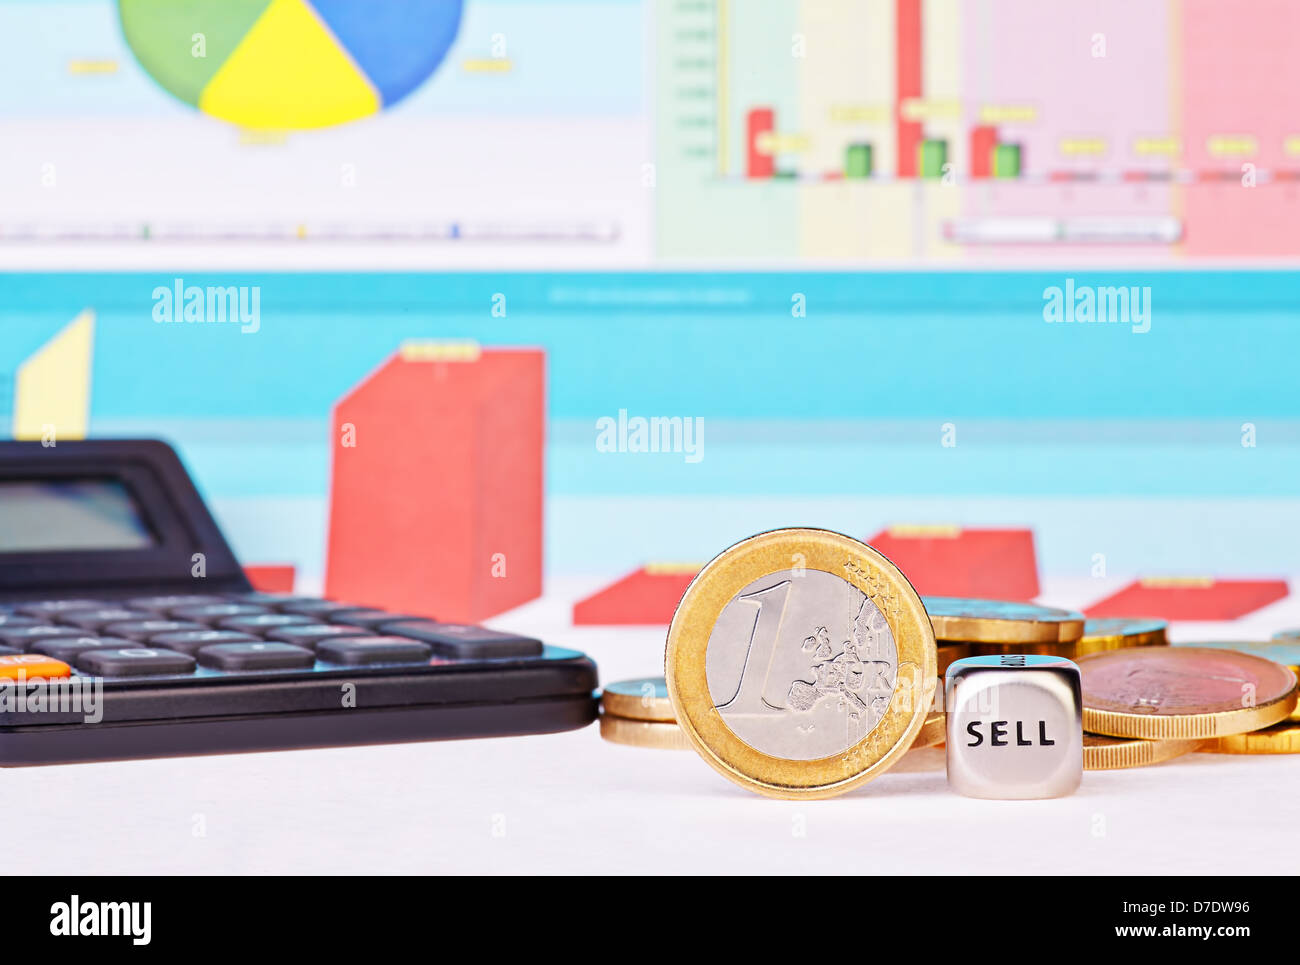 Dices cube with the word SELL, one-euro coin, calculator and financial diagrams as background. Selective focus Stock Photo